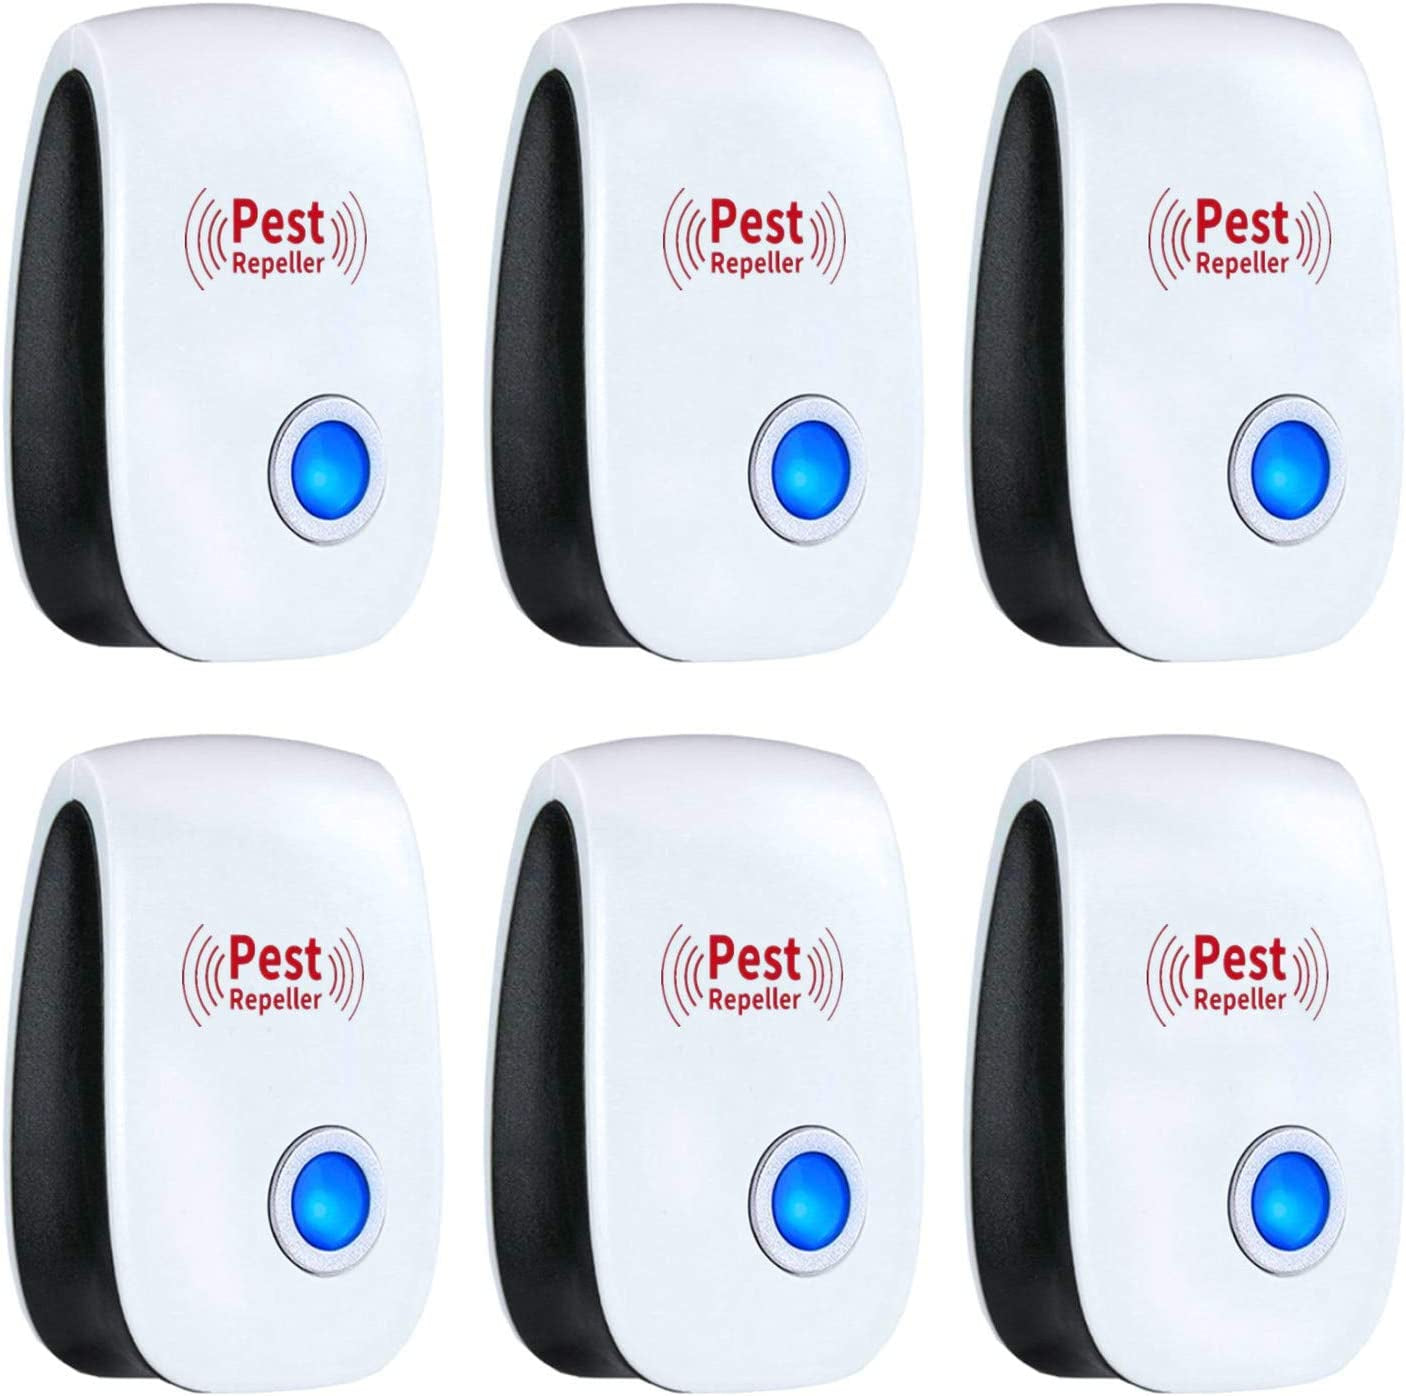 Merratric, Merratric Ultrasonic Pest Repeller 6 Pack Electronic Ultrasonic Pest Repellent Indoor Plug in Pest Control Ultrasonic Repellent for Mice Cockroach Spider Ant Mosquito Bug Insect